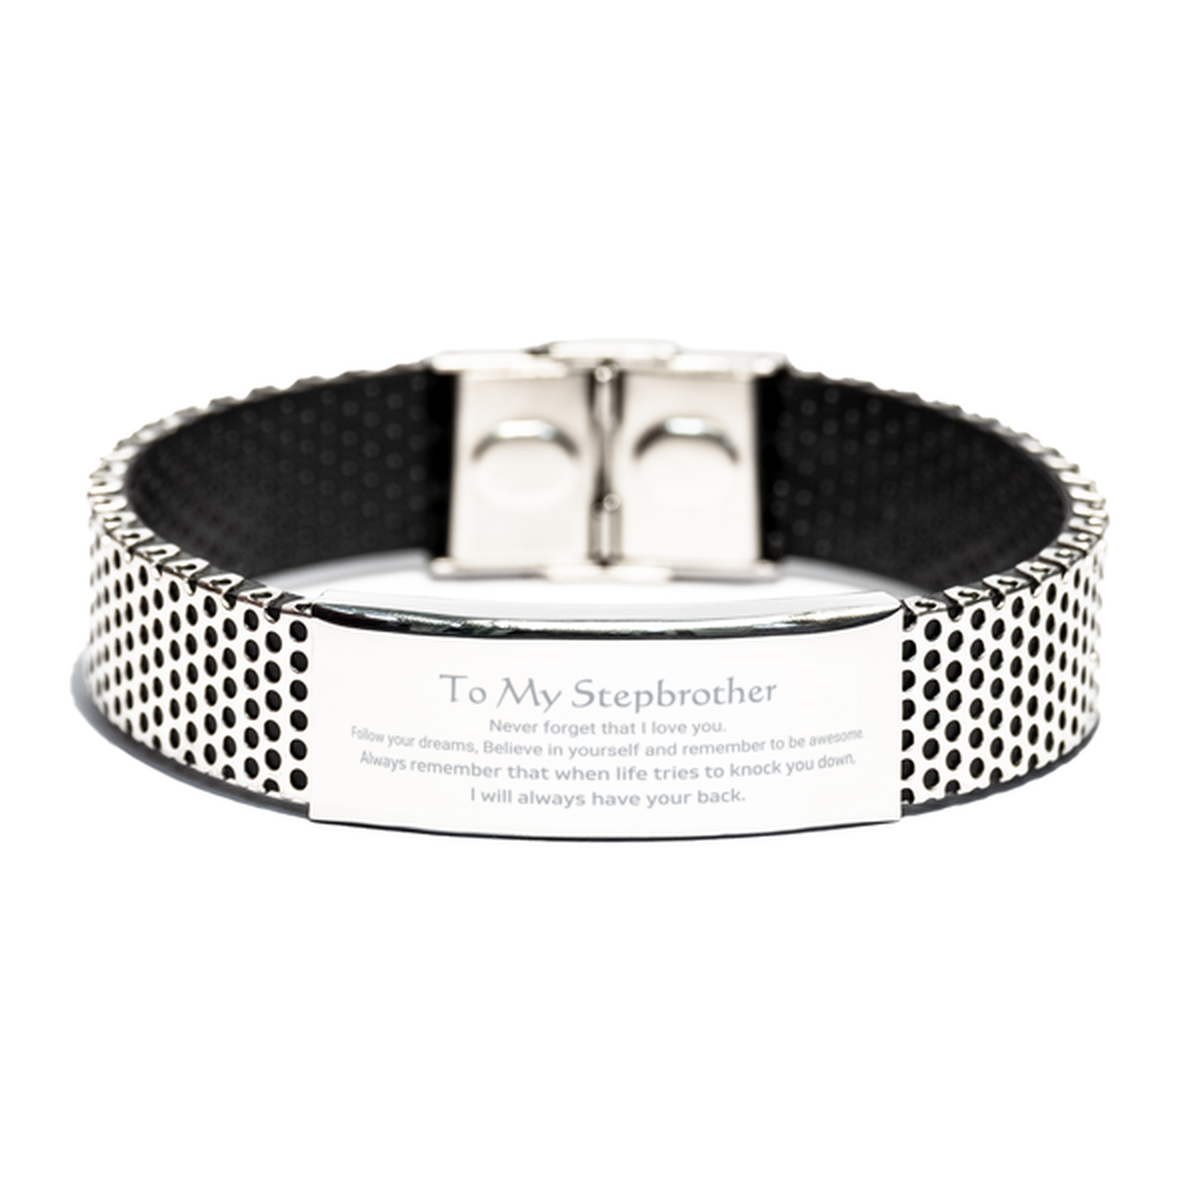 Inspirational Gifts for Stepbrother, Follow your dreams, Believe in yourself, Stepbrother Stainless Steel Bracelet, Birthday Christmas Unique Gifts For Stepbrother